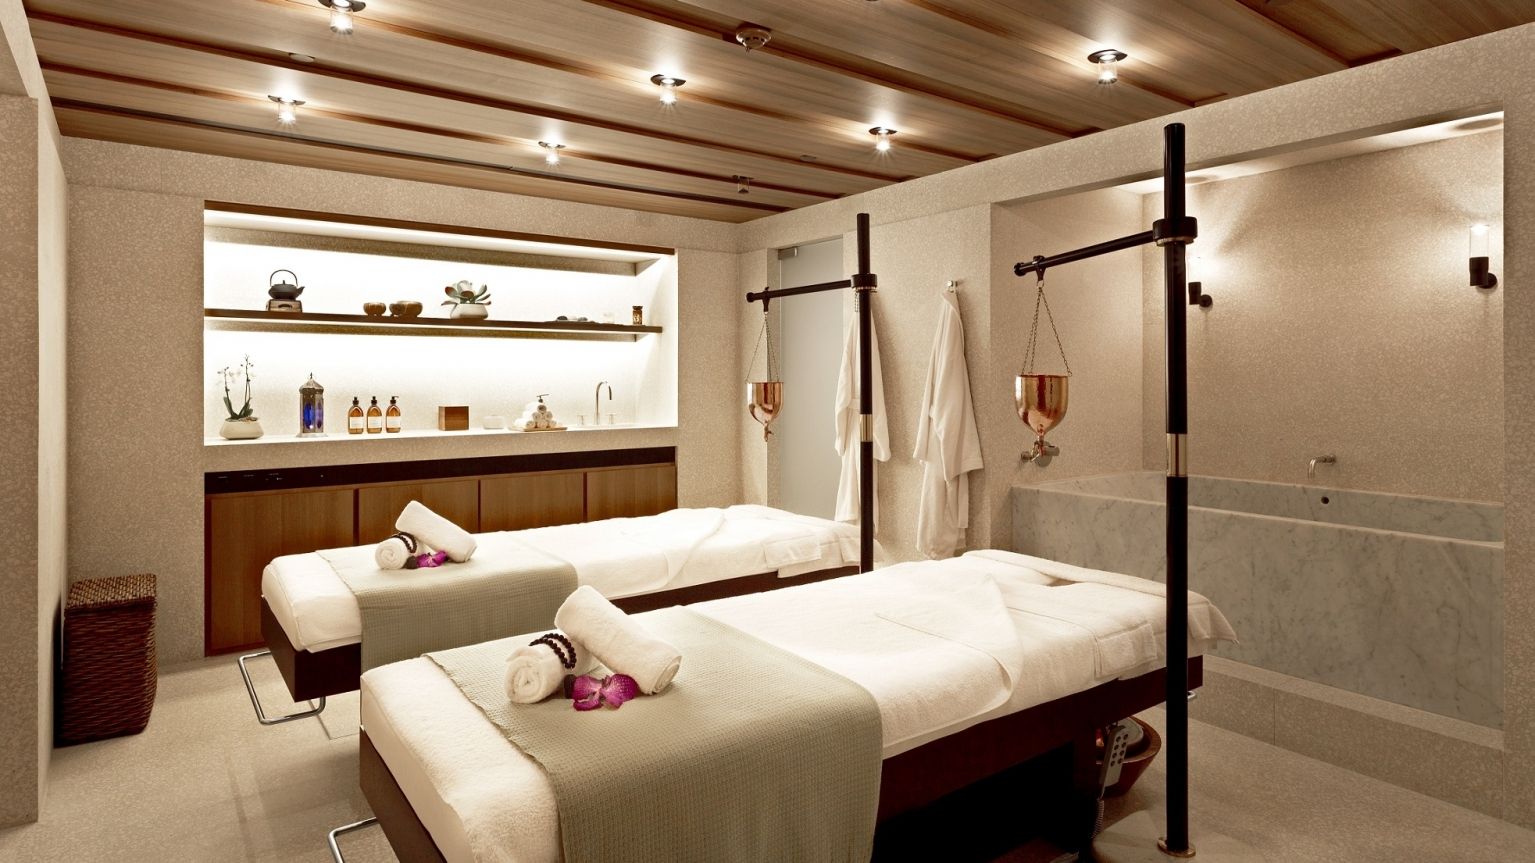 double treatment suite akasha holistic wellbeing hotel cafe royal